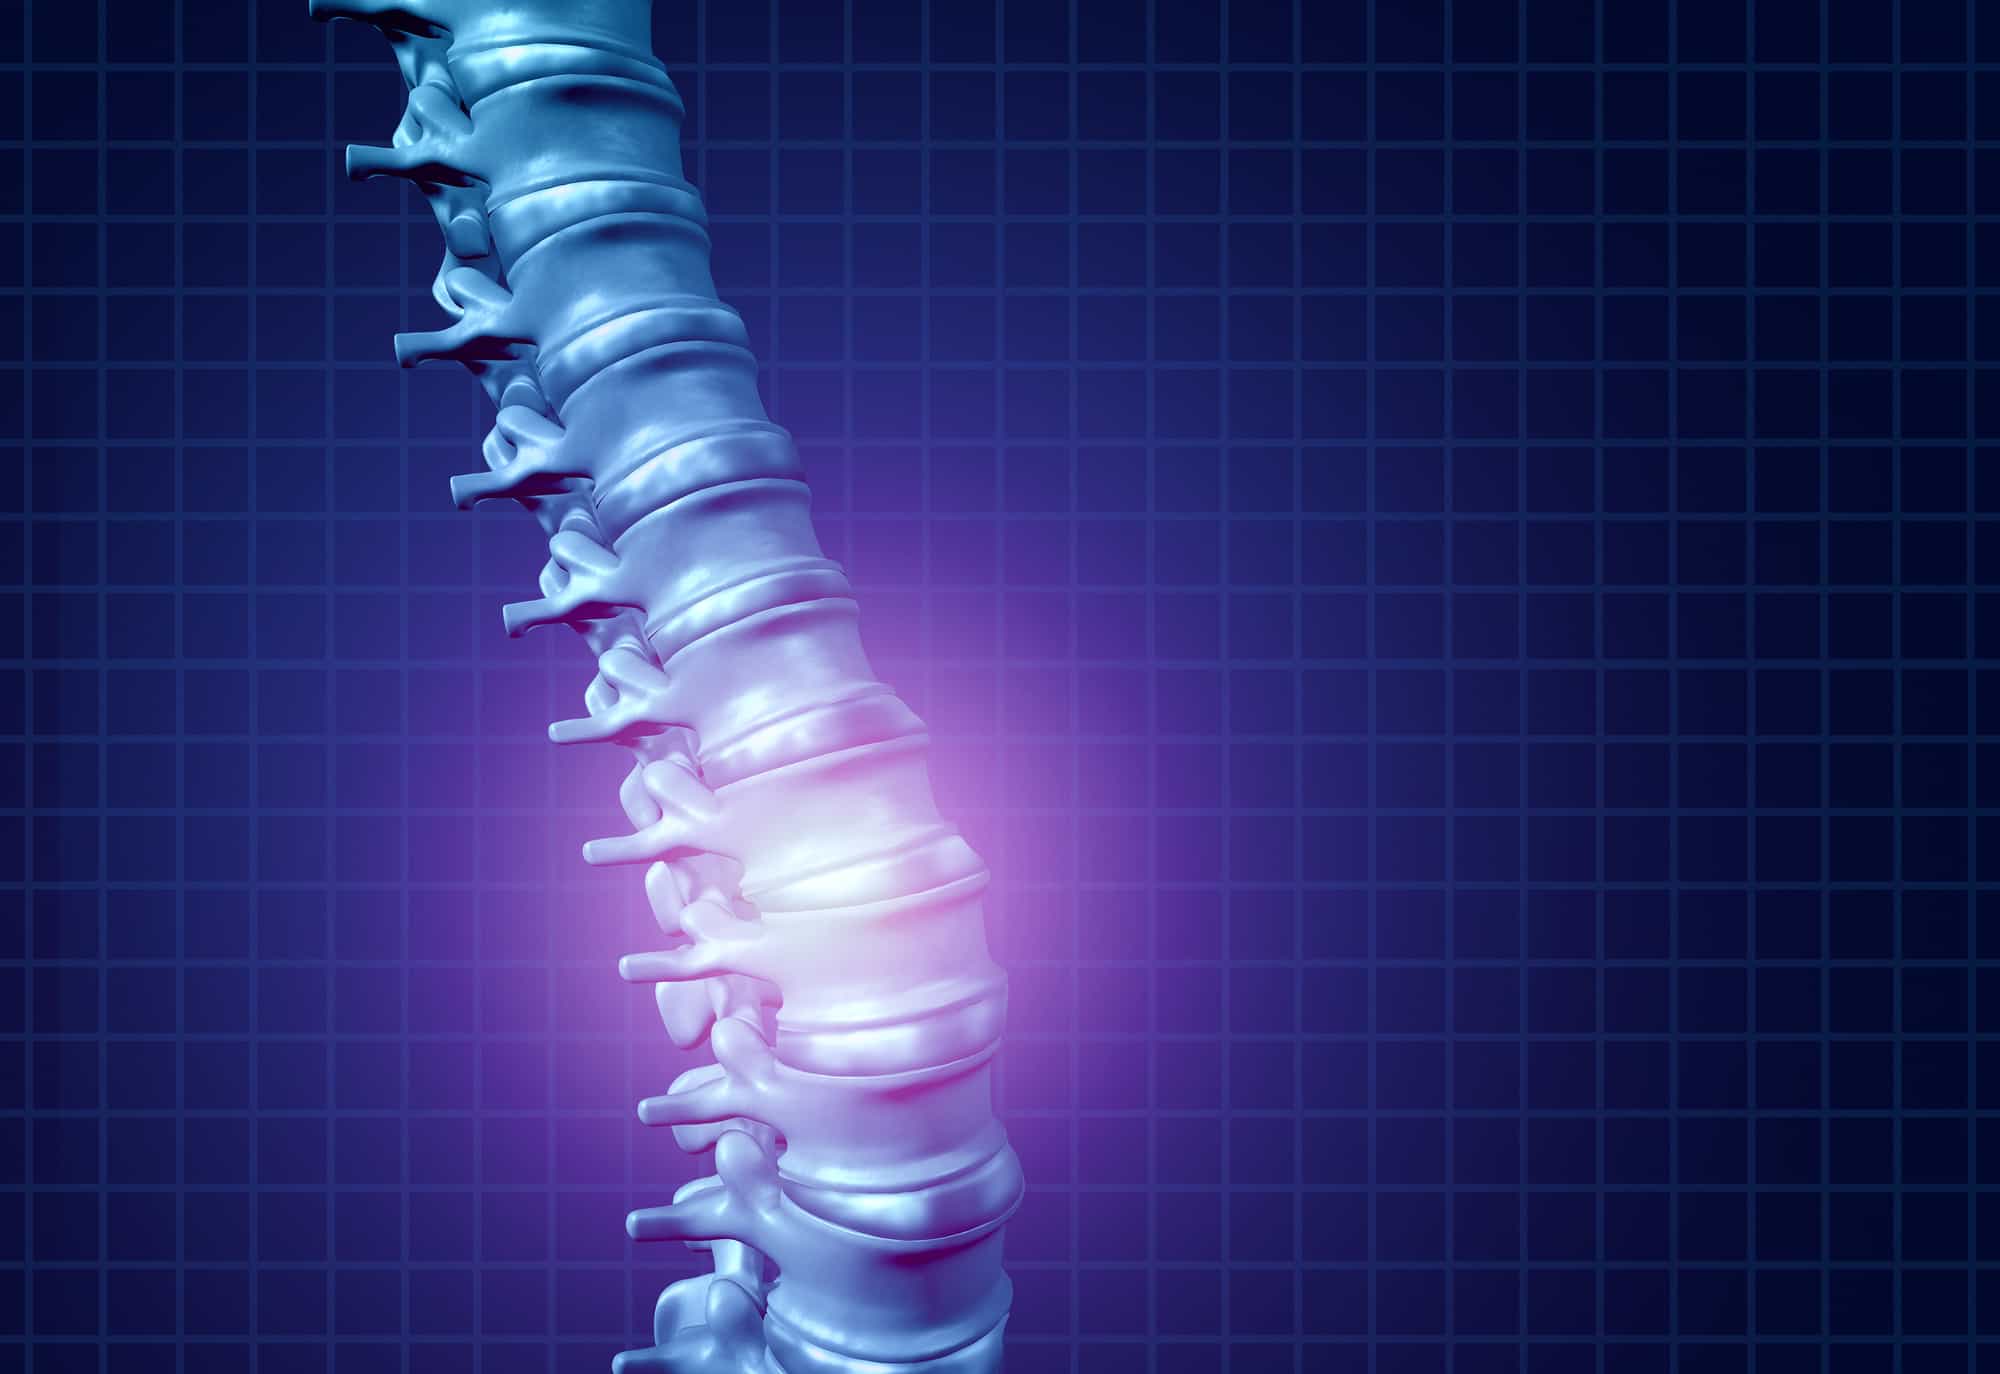 Abnormal Posture and Spinal Alignment Increases Degeneration